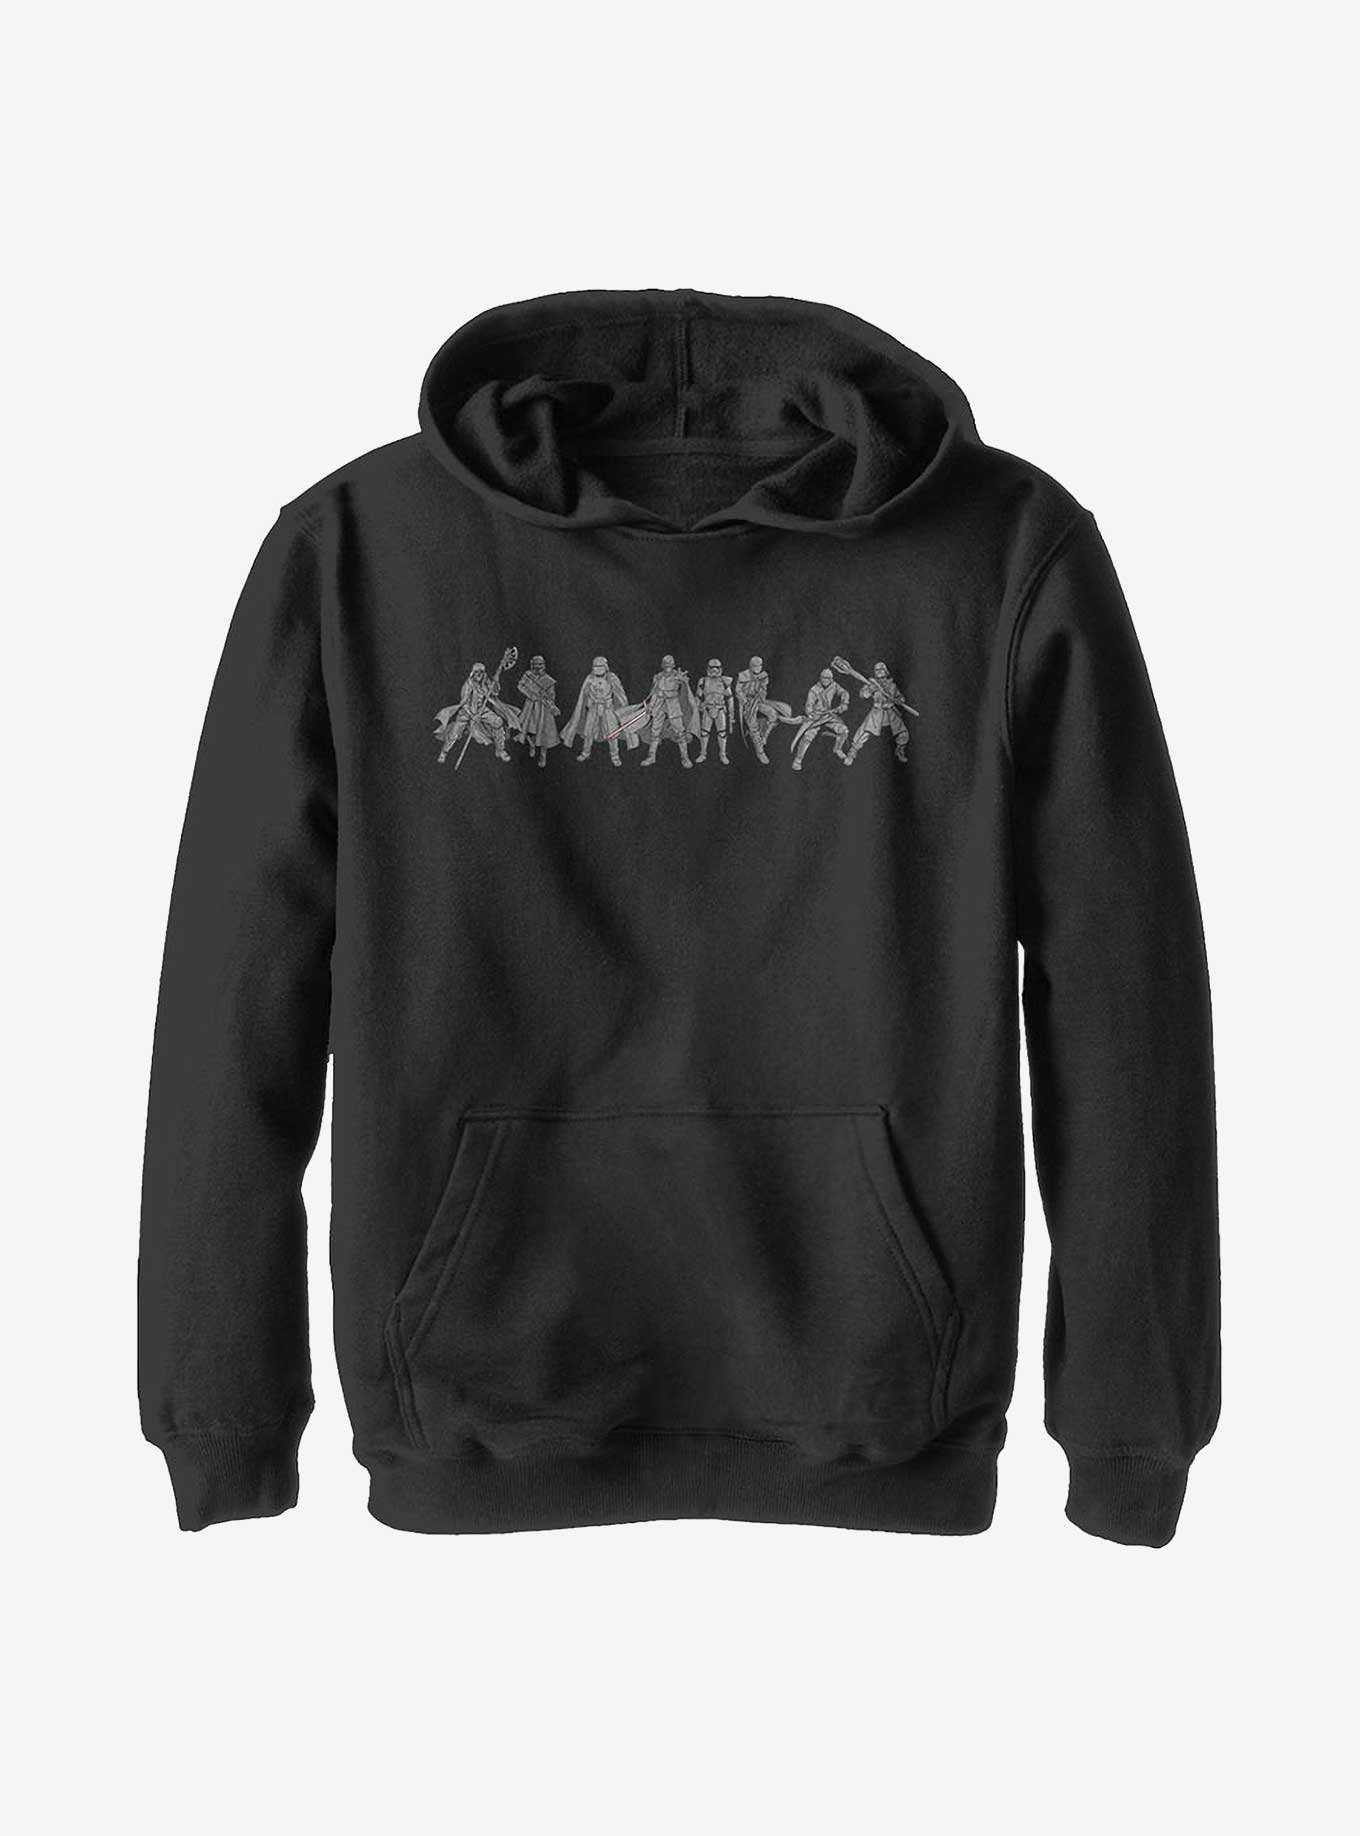 Star Wars Episode IX: The Rise Of Skywalker New Order Lineup Youth Hoodie, , hi-res